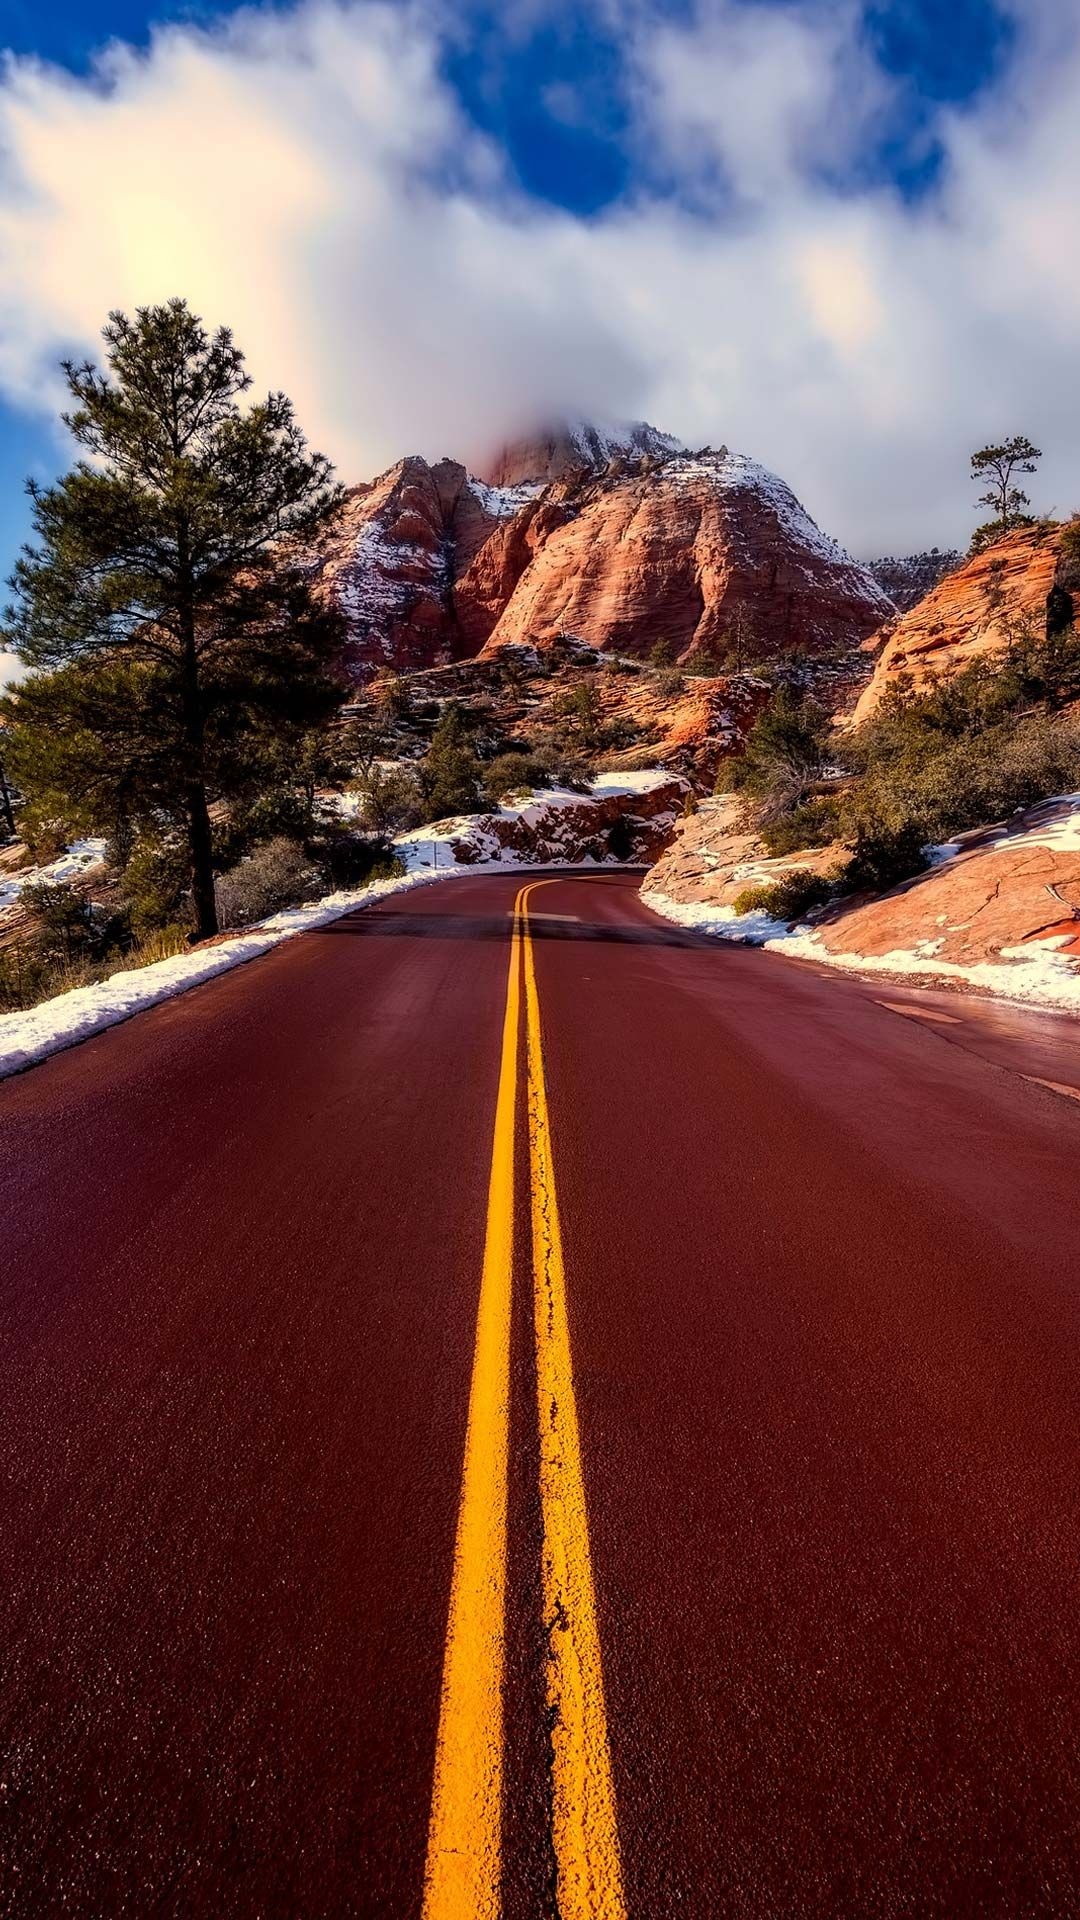 Nature phone backgrounds, Great paysages magnifiques, Highway travels, Routes de campagne, 1080x1920 Full HD Phone